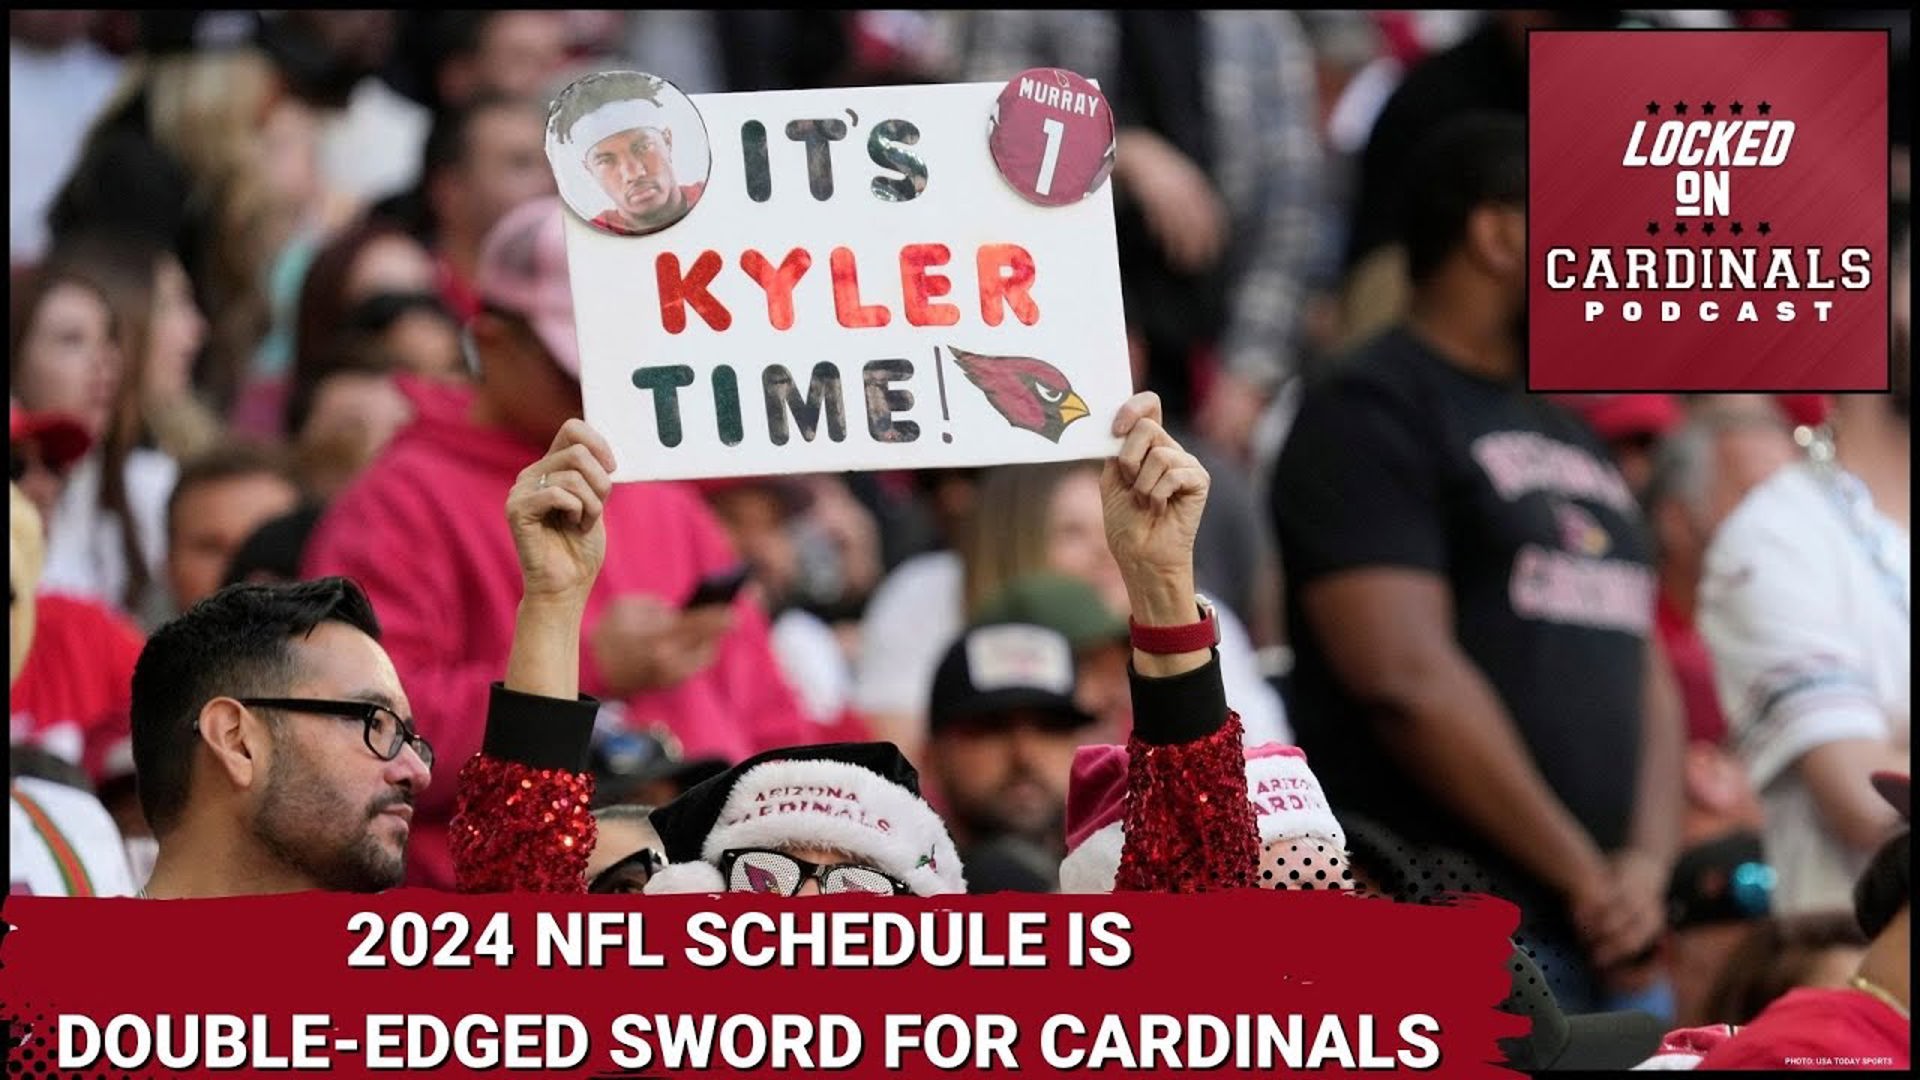 Arizona Cardinals 2024 NFL schedule is a difficult one. While they rank in the bottom third in strength of schedule, that's very misleading